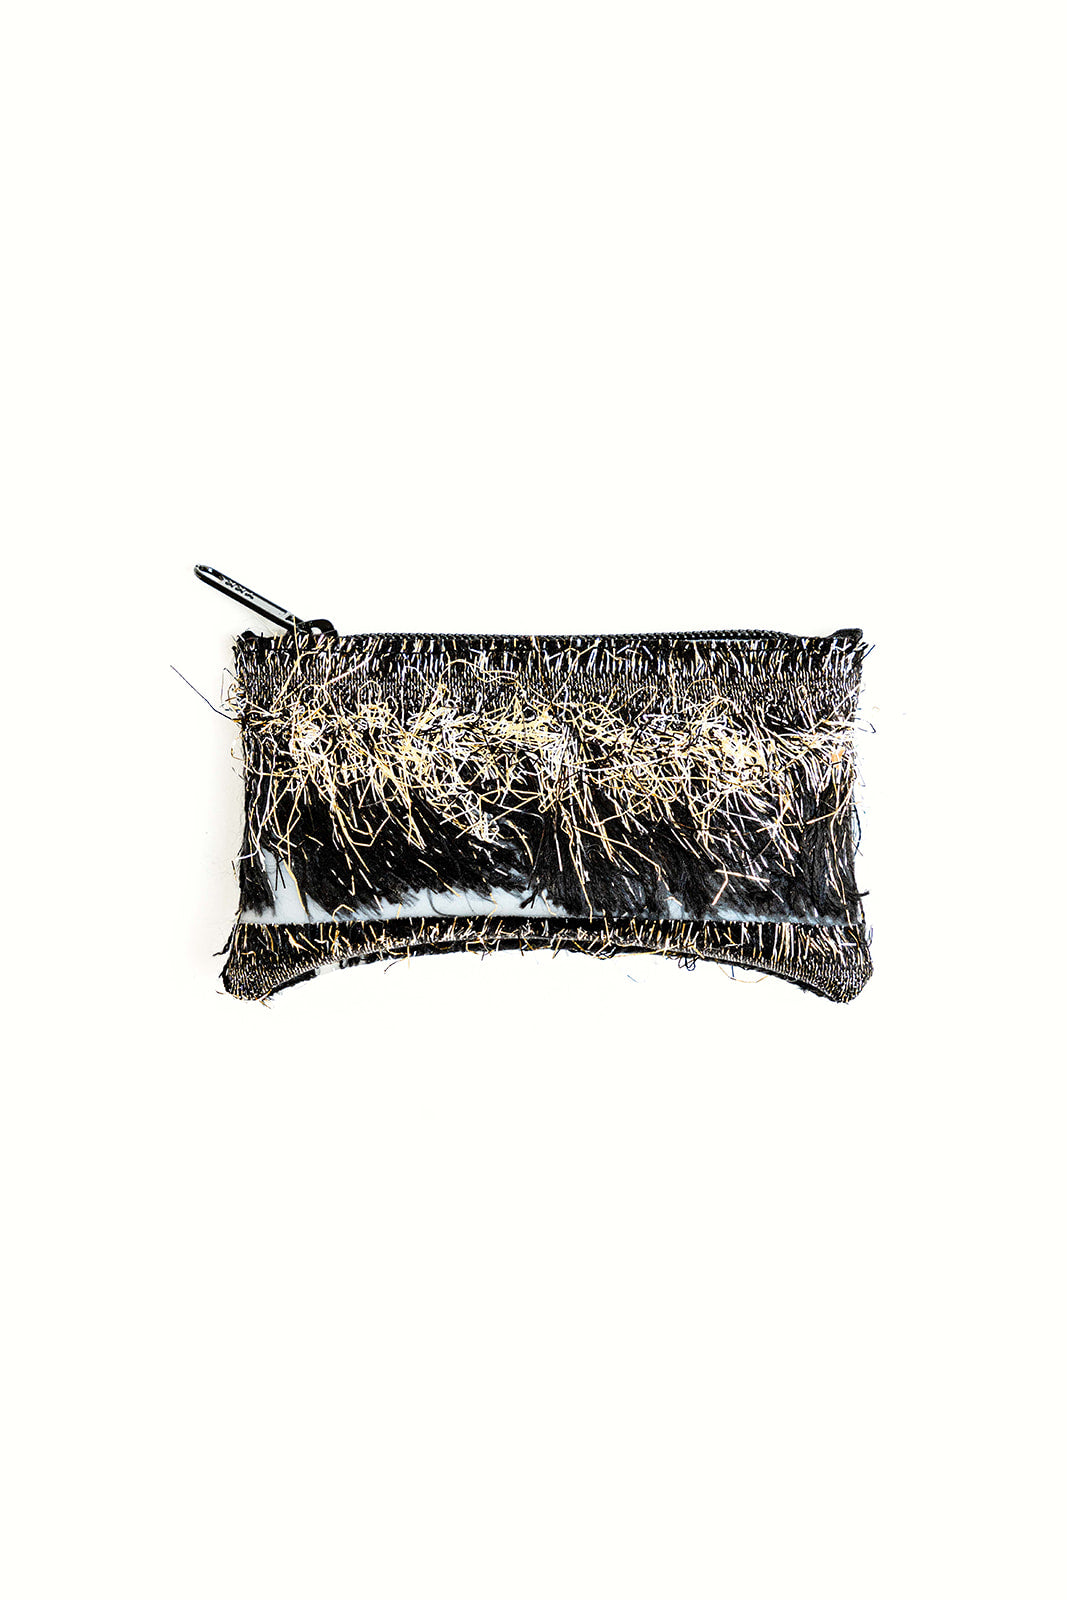 Luisa-cevese-long-coin-purse-gold-and-black-amarees